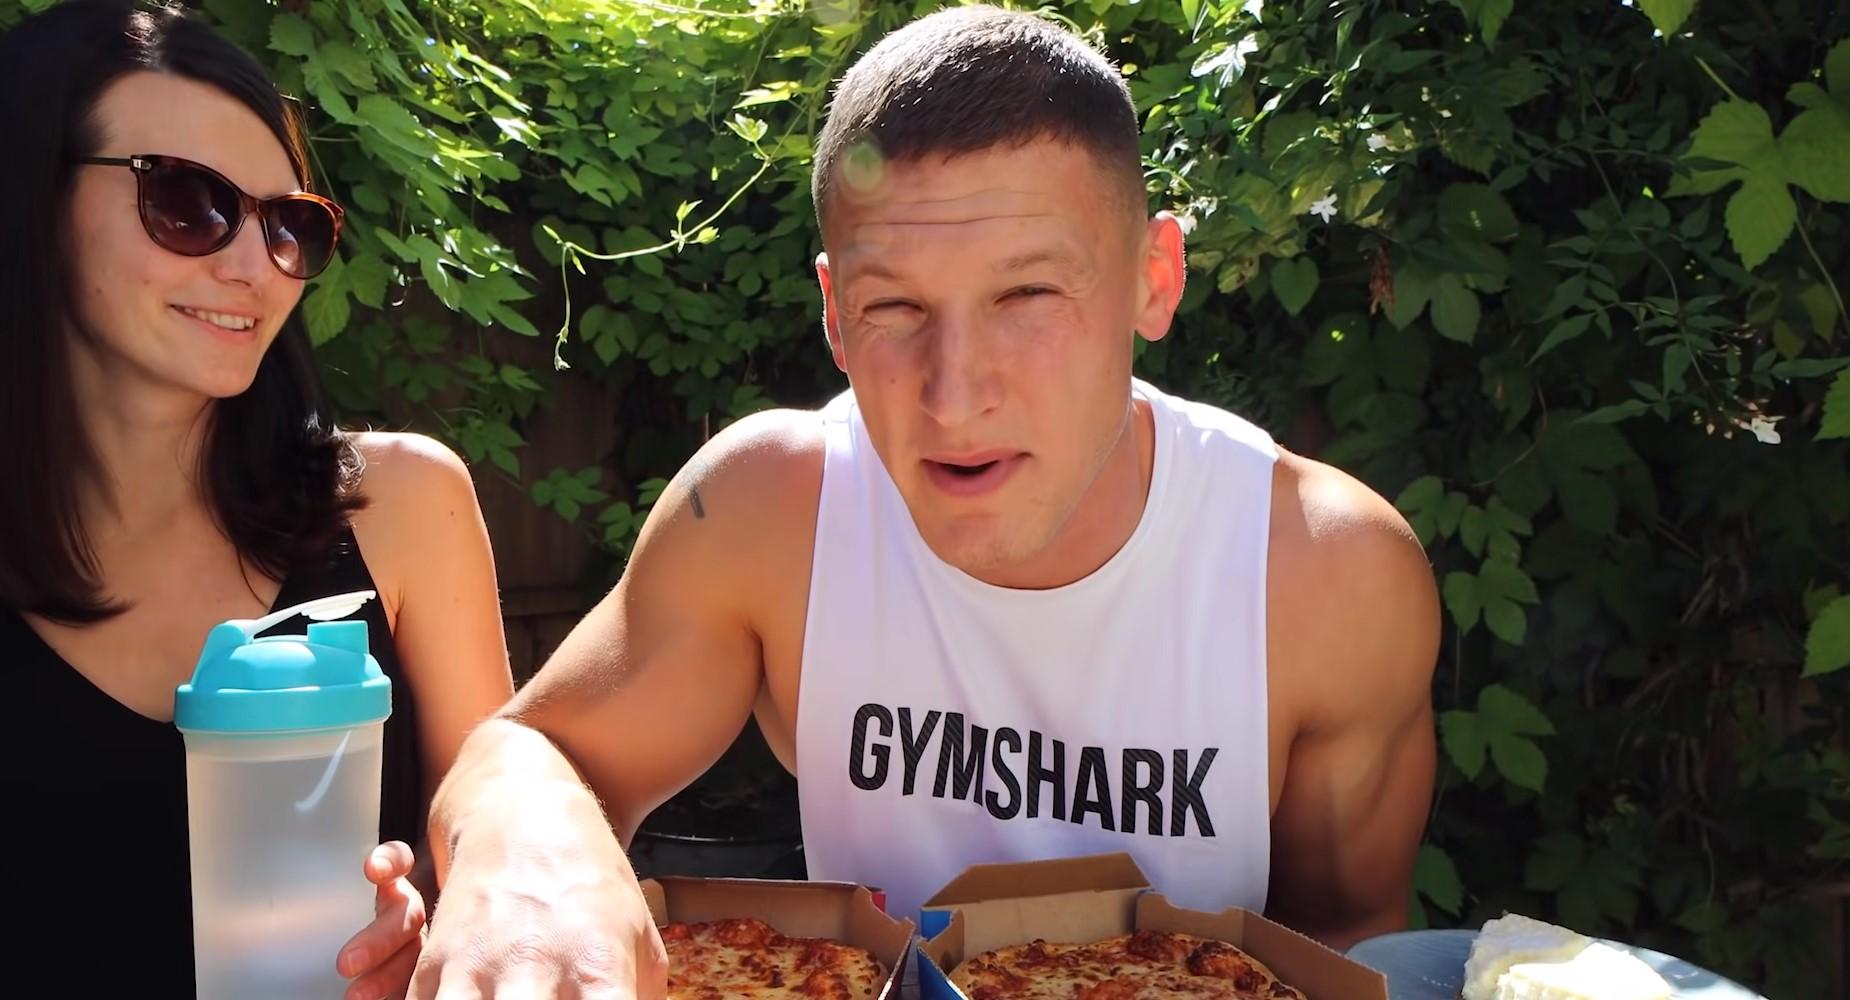 MattDoesFitness eating two Dominos pizzas.